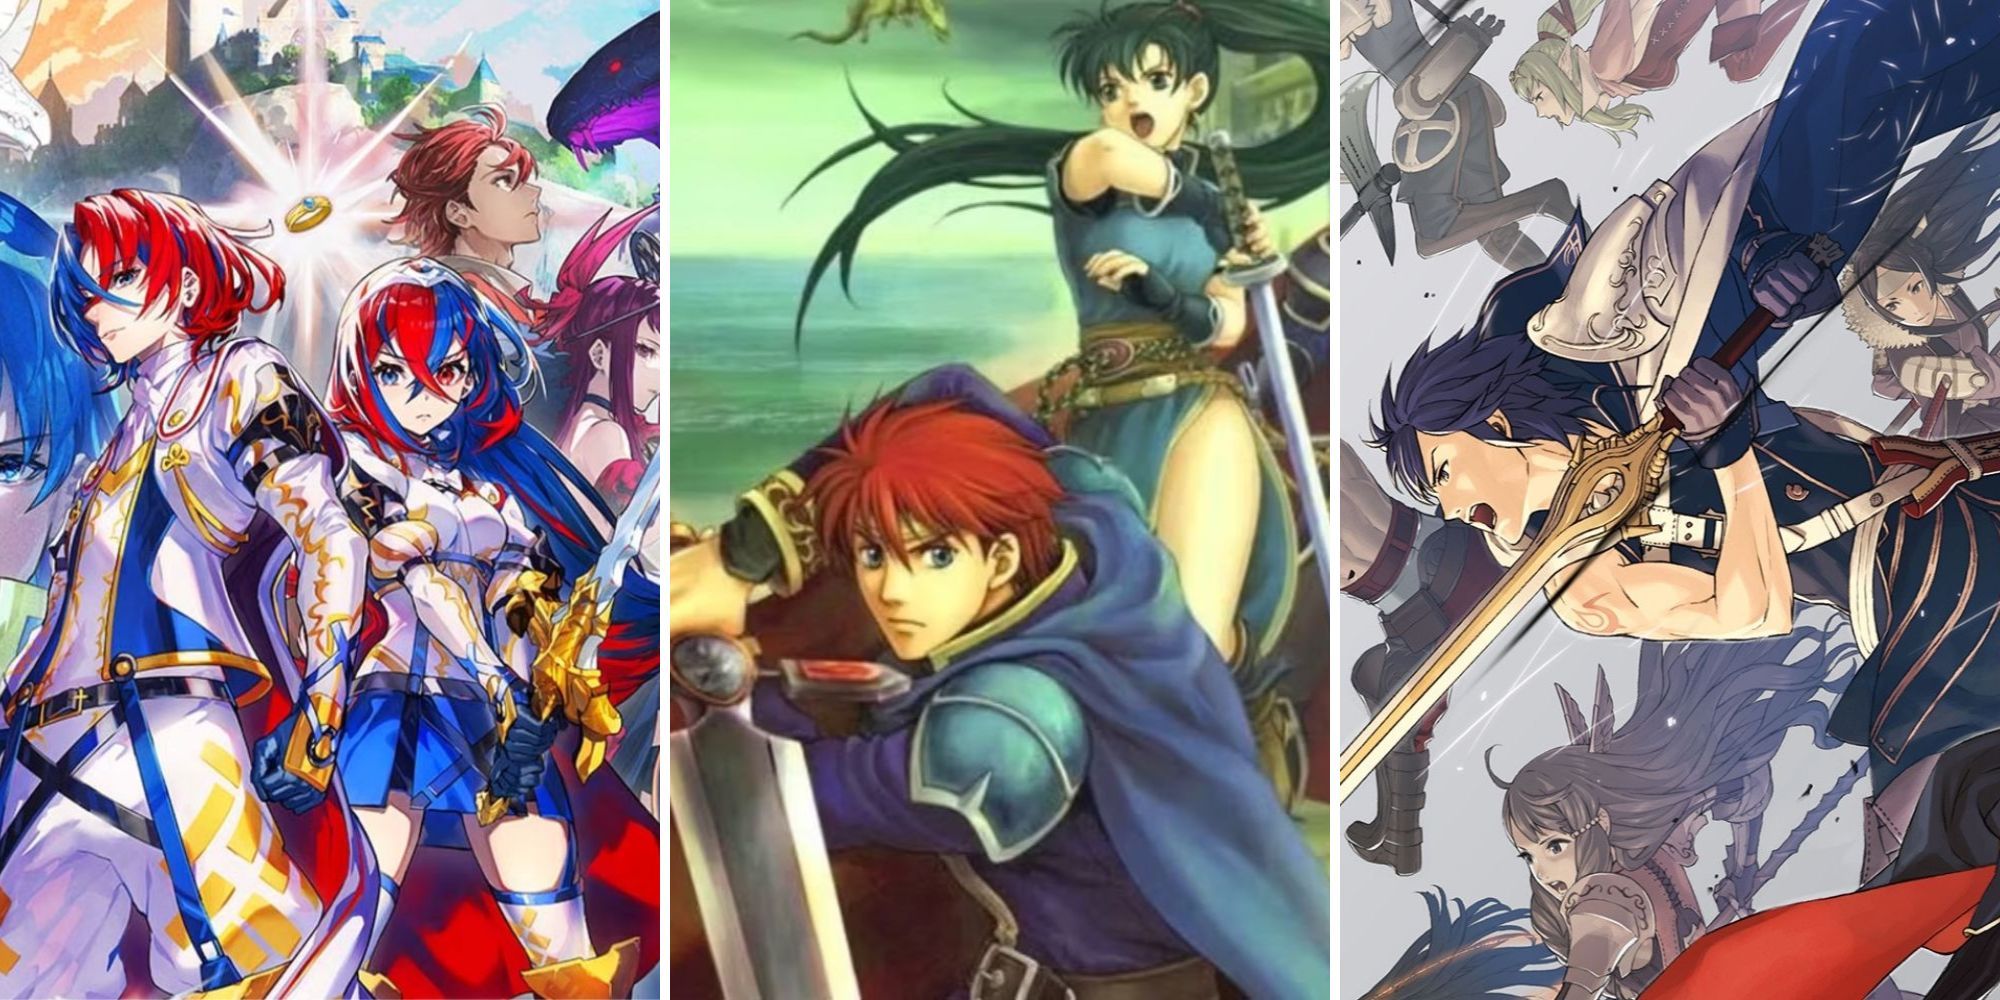 Male and Female Alear stand beside each other, Eliwood and Lyn prepare to attack, Chrom falls through the air with his allies